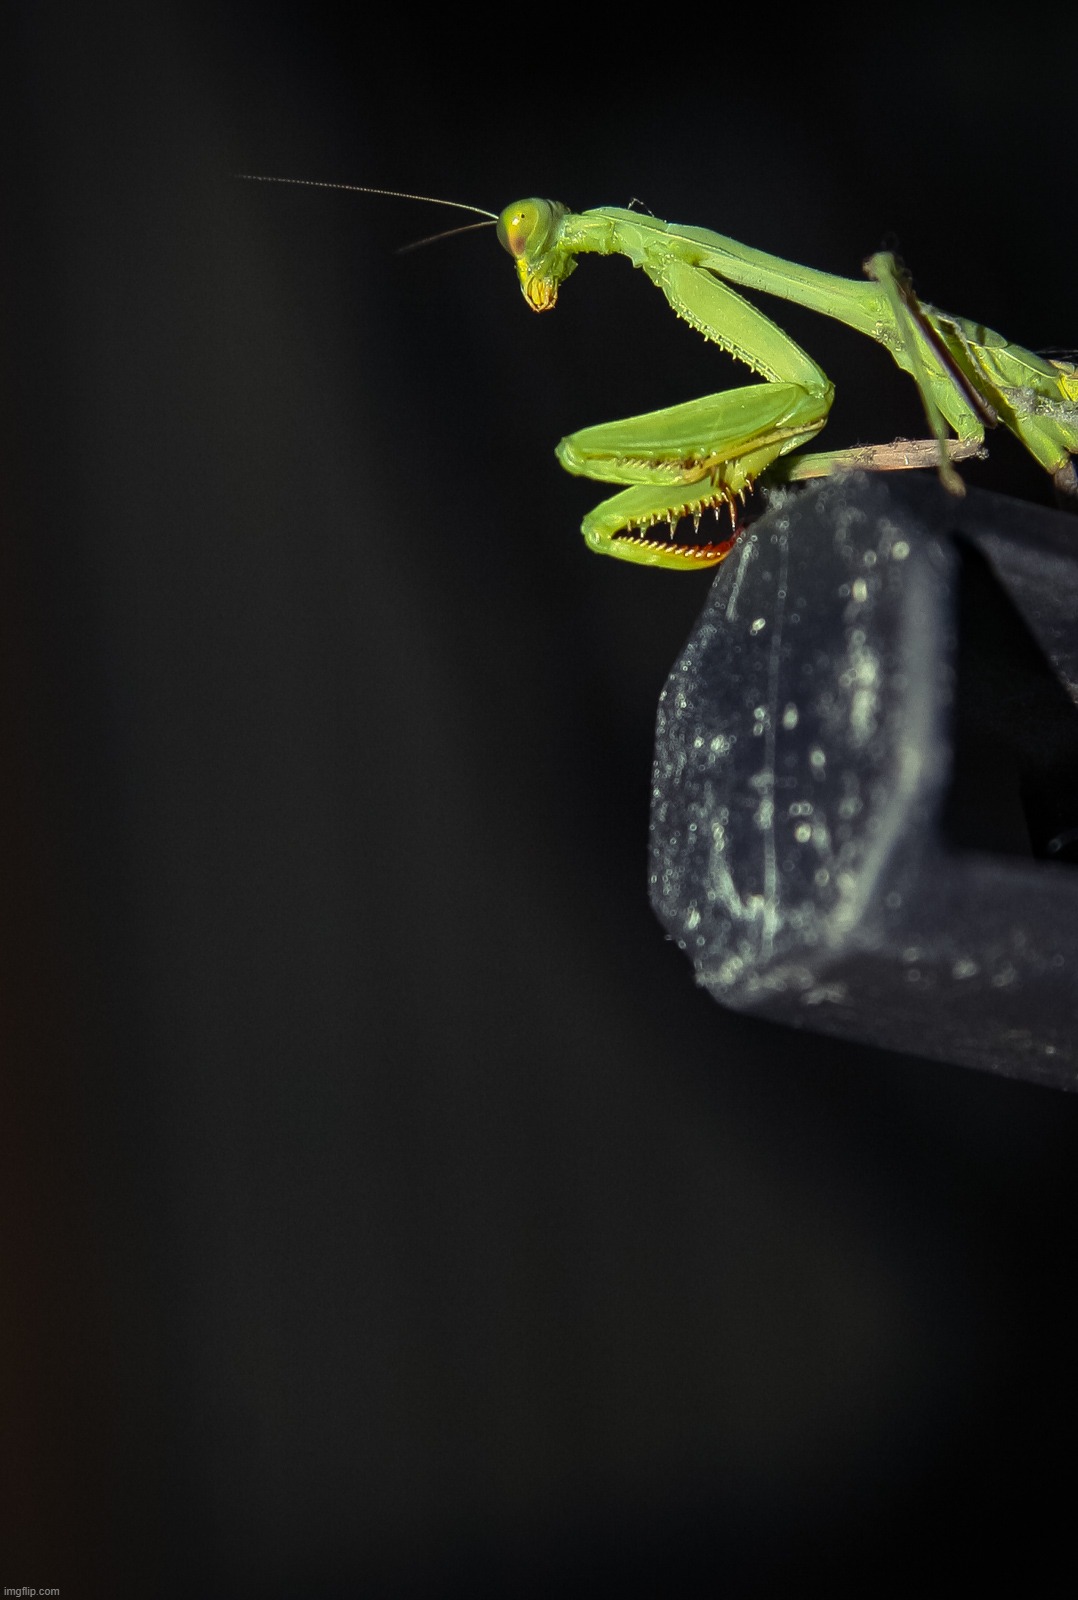 Found this critter scamping around in my back yard. That's a broom handle it's on. | image tagged in original photography,praying mantis,green,stalking,egos | made w/ Imgflip meme maker